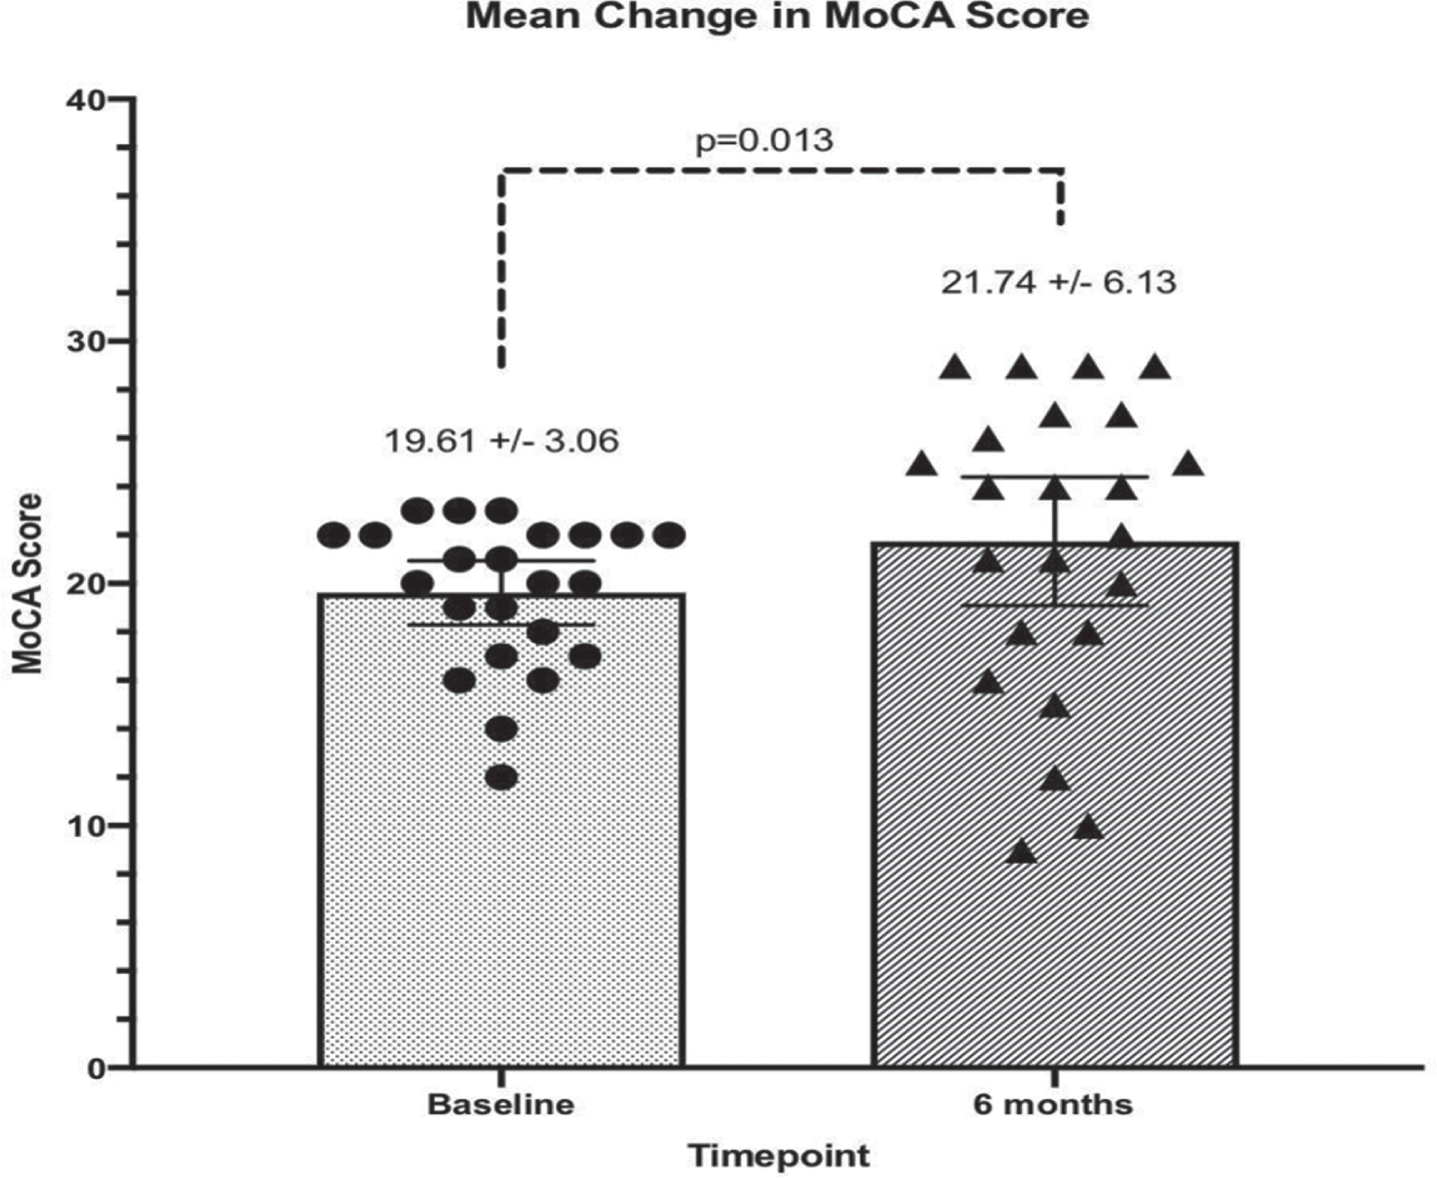 MoCA test scores of participants (n = 23) at baseline and 6 months after initiating treatment. MoCA test scores ranged from 12–23 at baseline and were statistically significantly different at Month 6 (p = 0.013, Wilcoxon signed rank test).